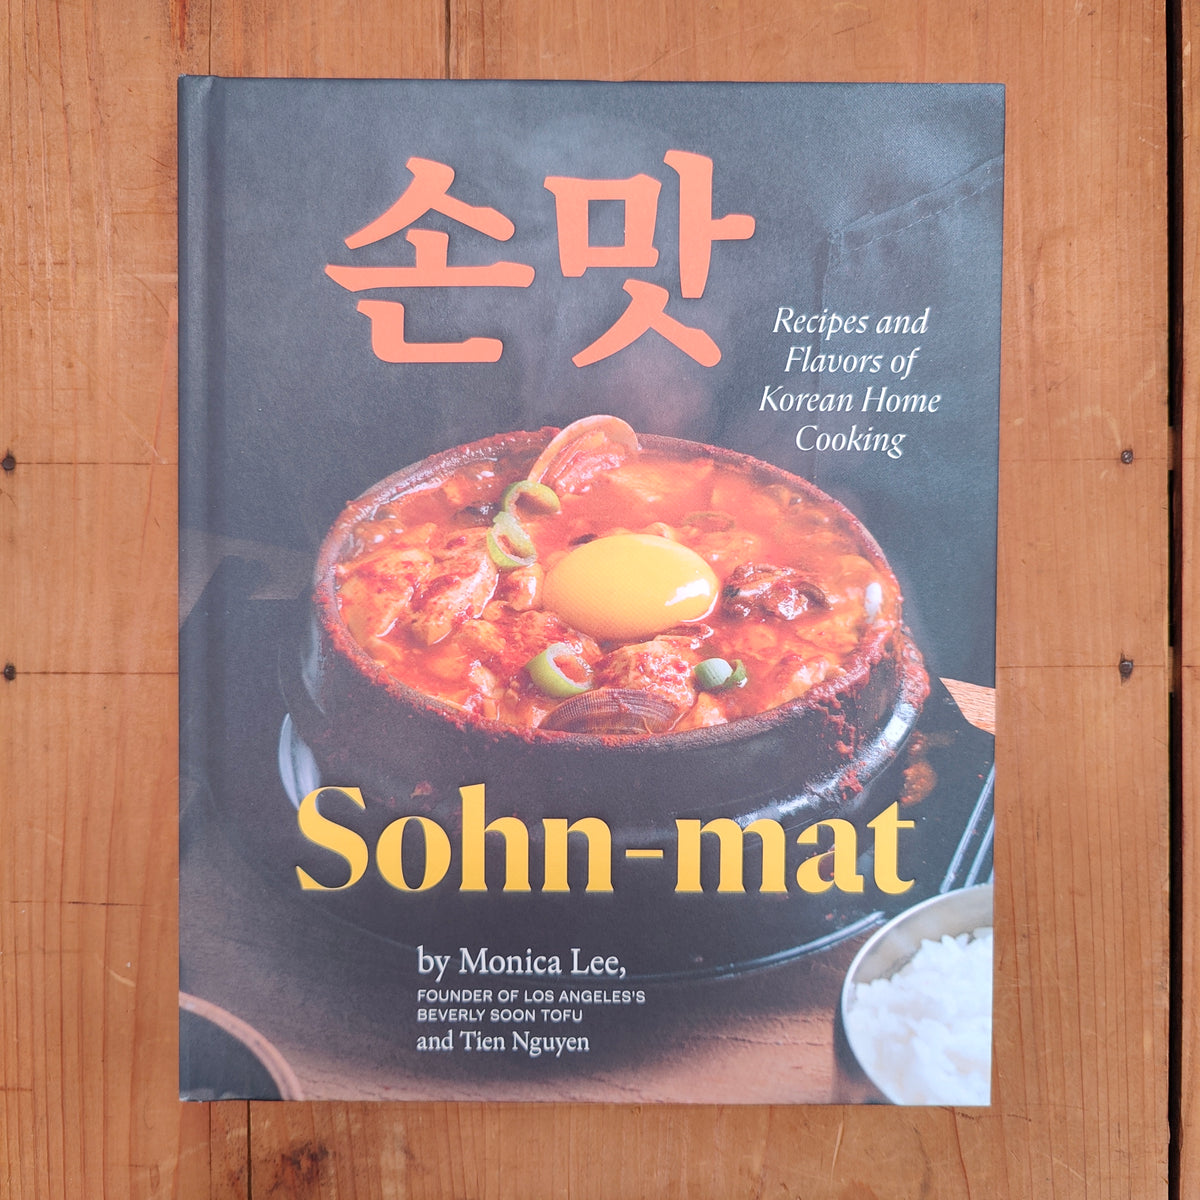 Sohn-mat: Recipes and Flavors of Korean Home Cooking - Monica Lee and Tien Nguyen